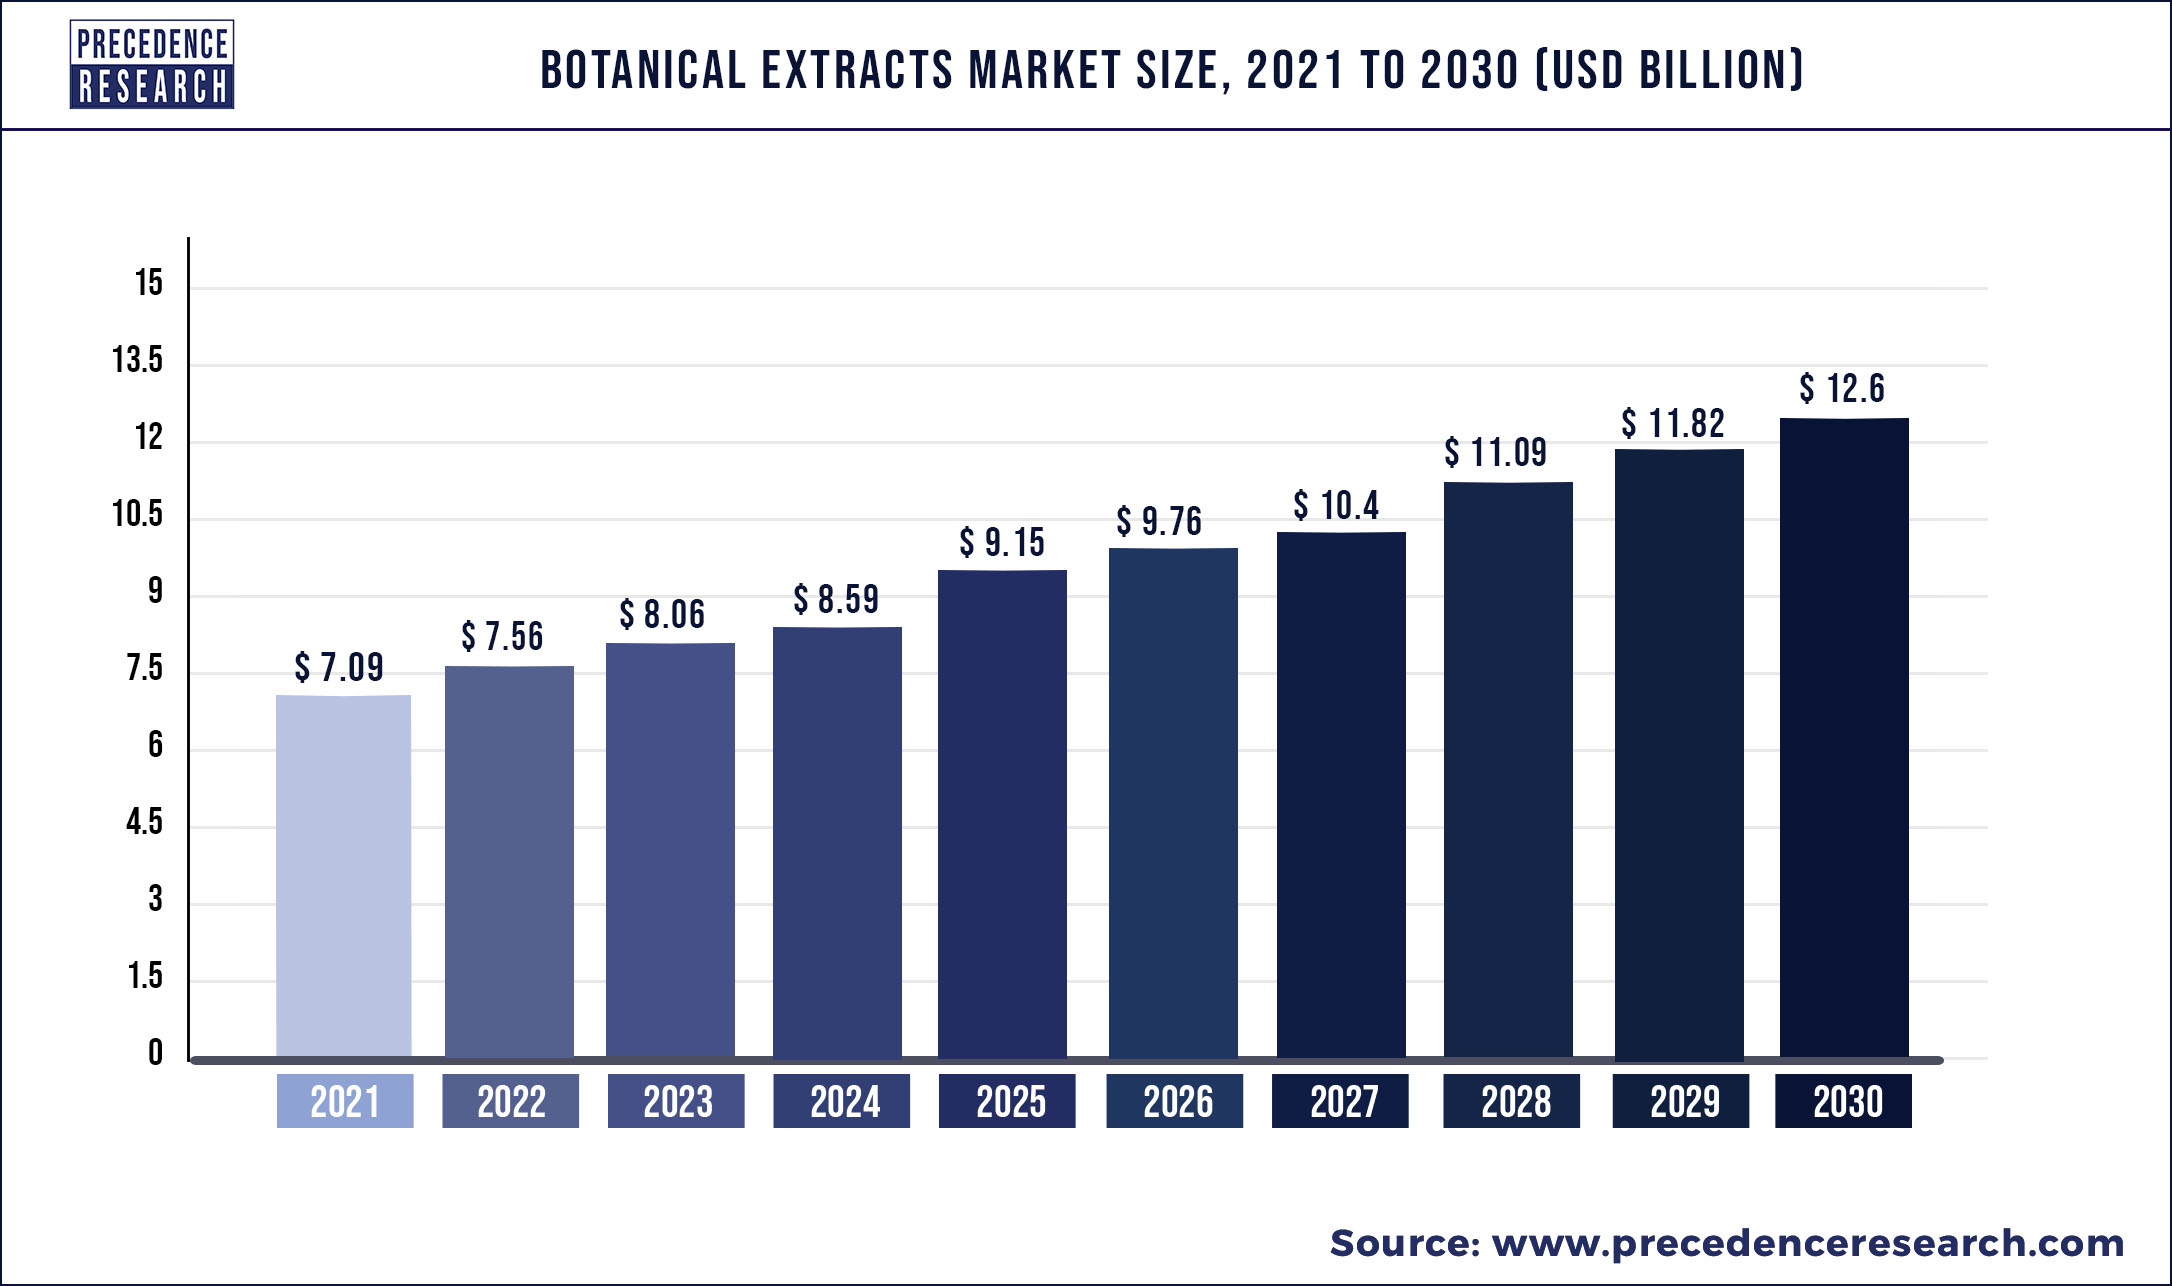 Botanical Extracts Market Size to Exceed US$ 12.6 Billion by 2030 | Says Precedence Research